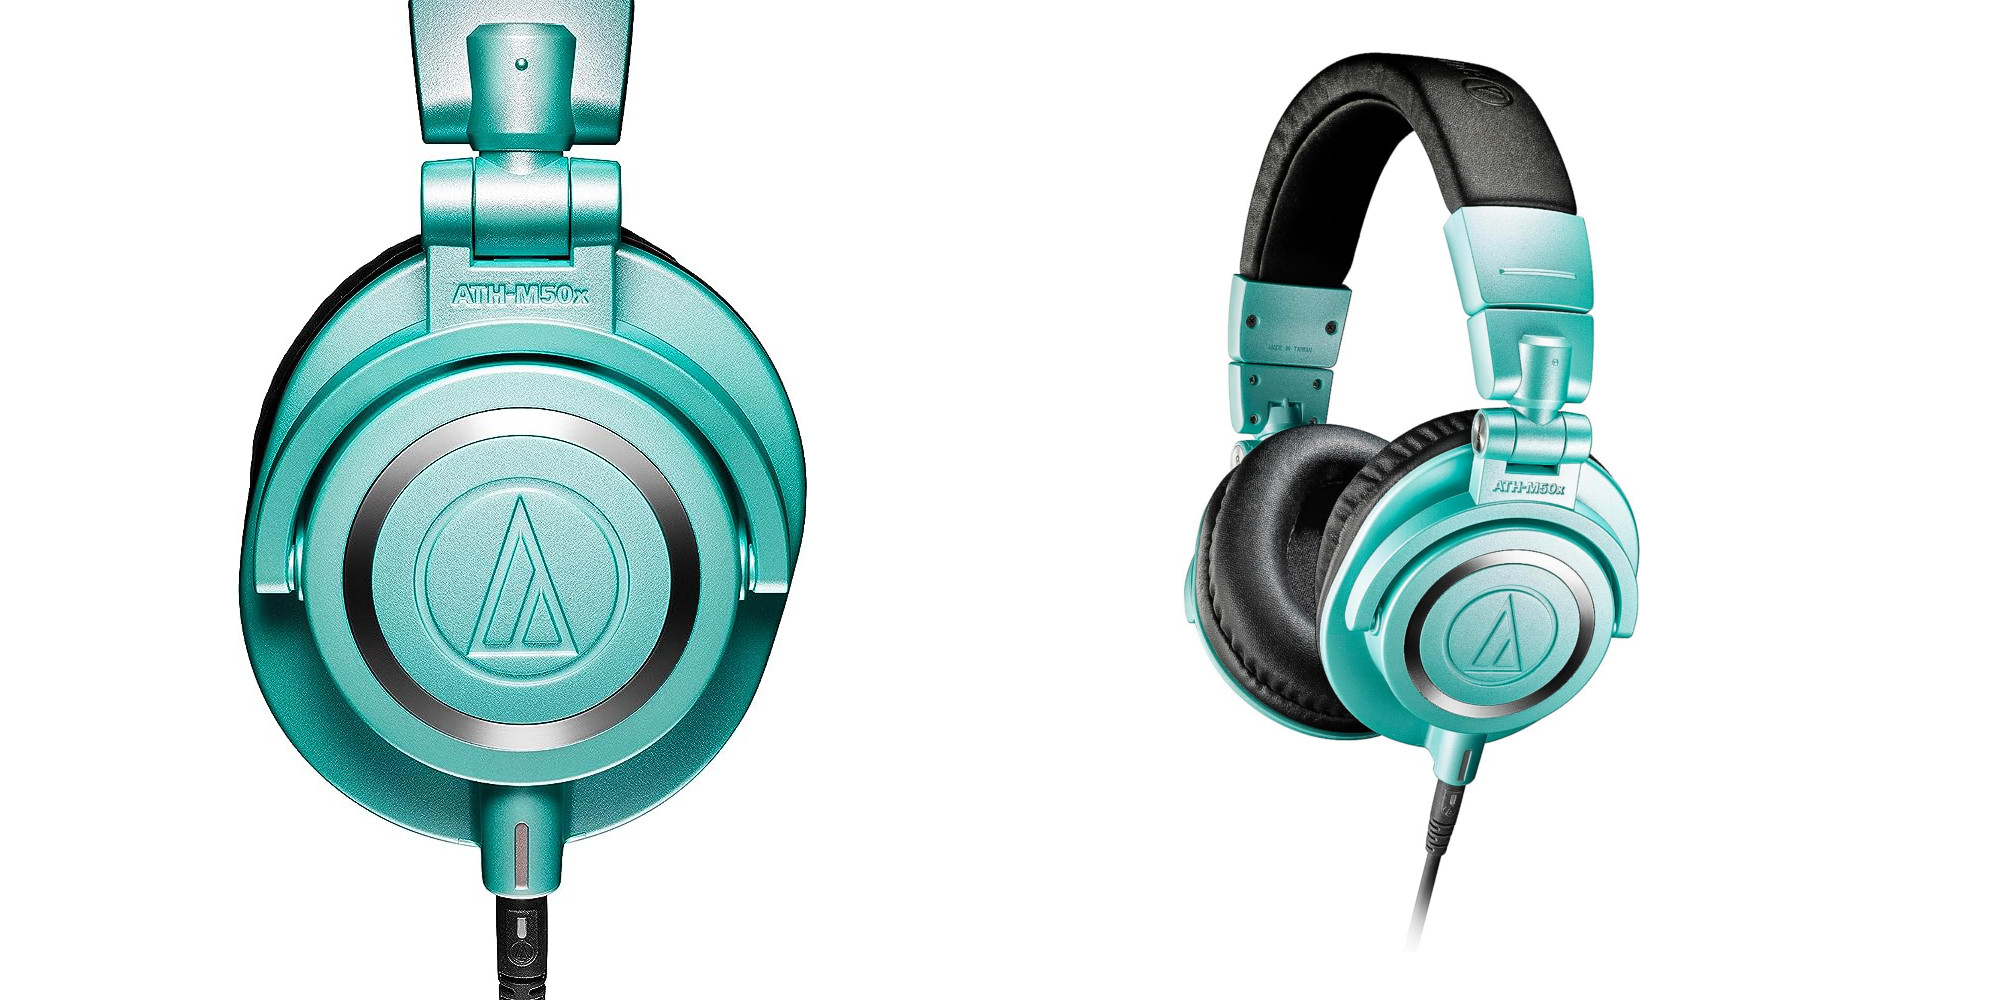 The Audio-Technica M50xBT2 are studio-quality wireless headphones, now  available in a beautiful Ice Blue colour! Let's take a closer look…